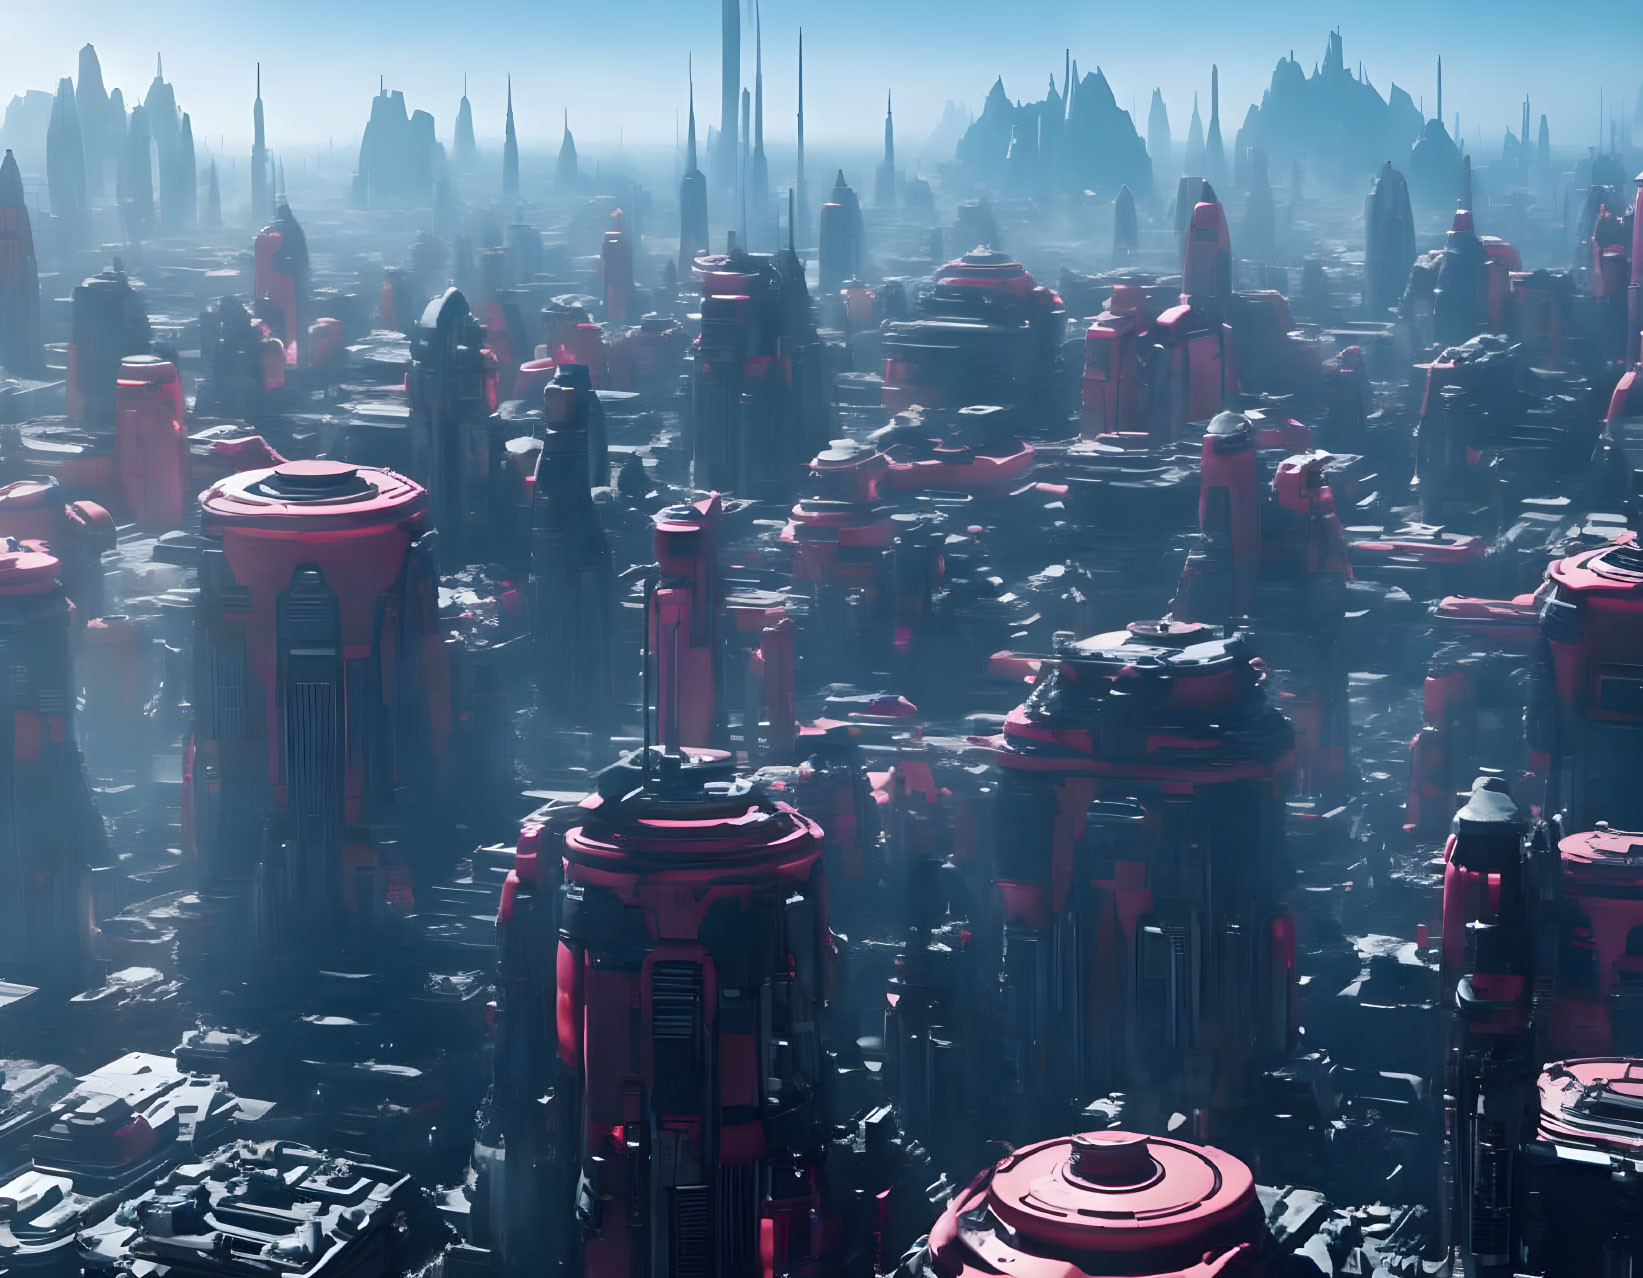 Futuristic cityscape with towering skyscrapers in blue and pink tones